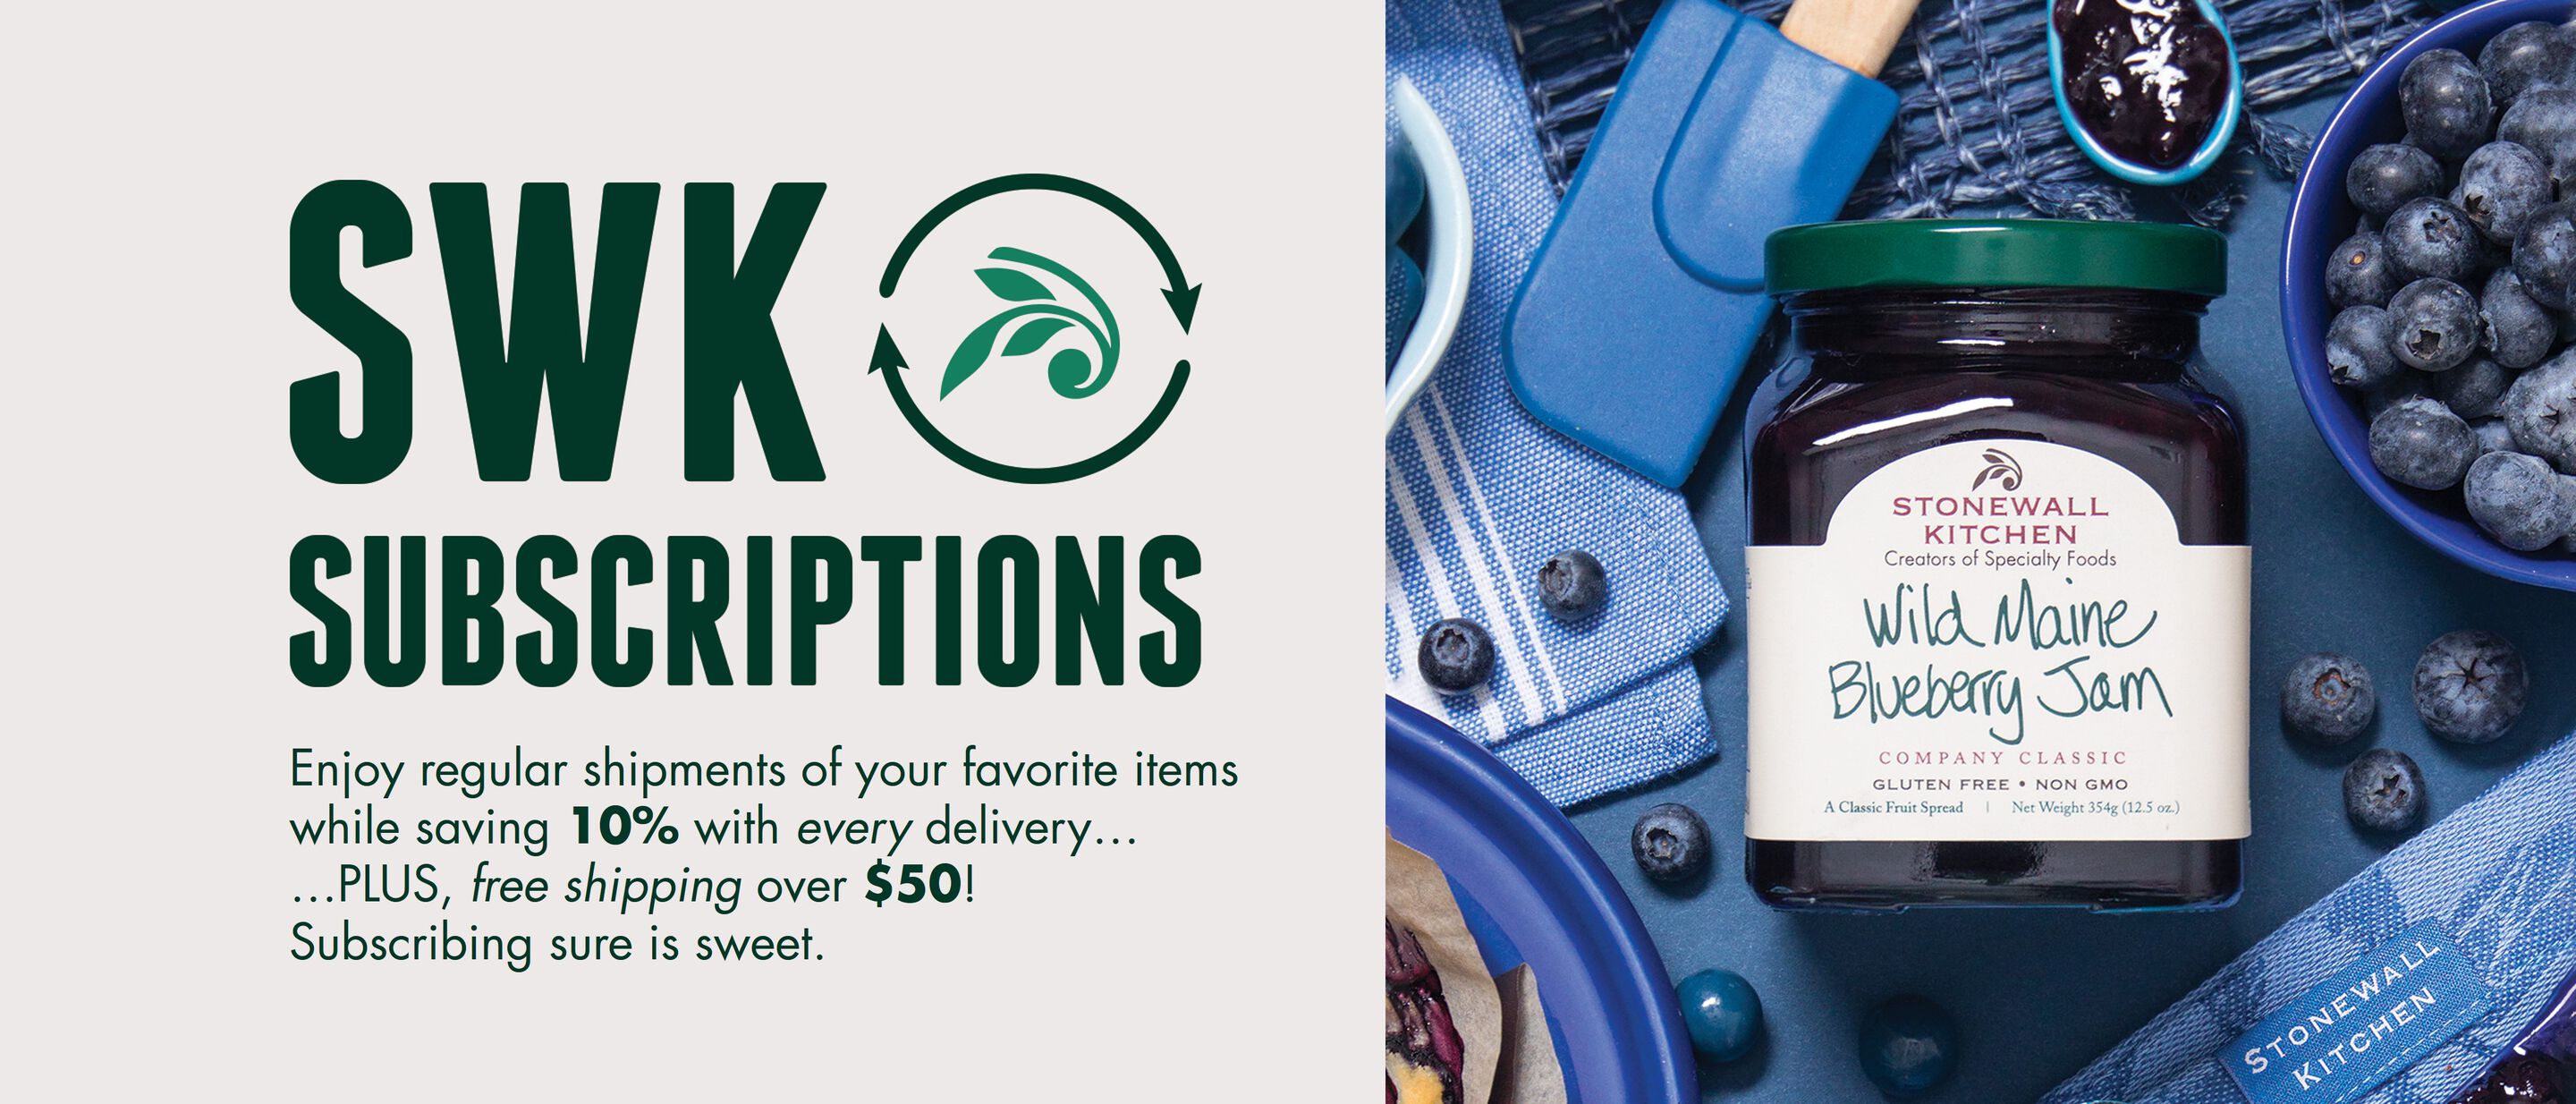 SWK Subscriptions: Enjoy regular shipments of your favorite items while saving 10% with every delivery. Subscribing sure is sweet.